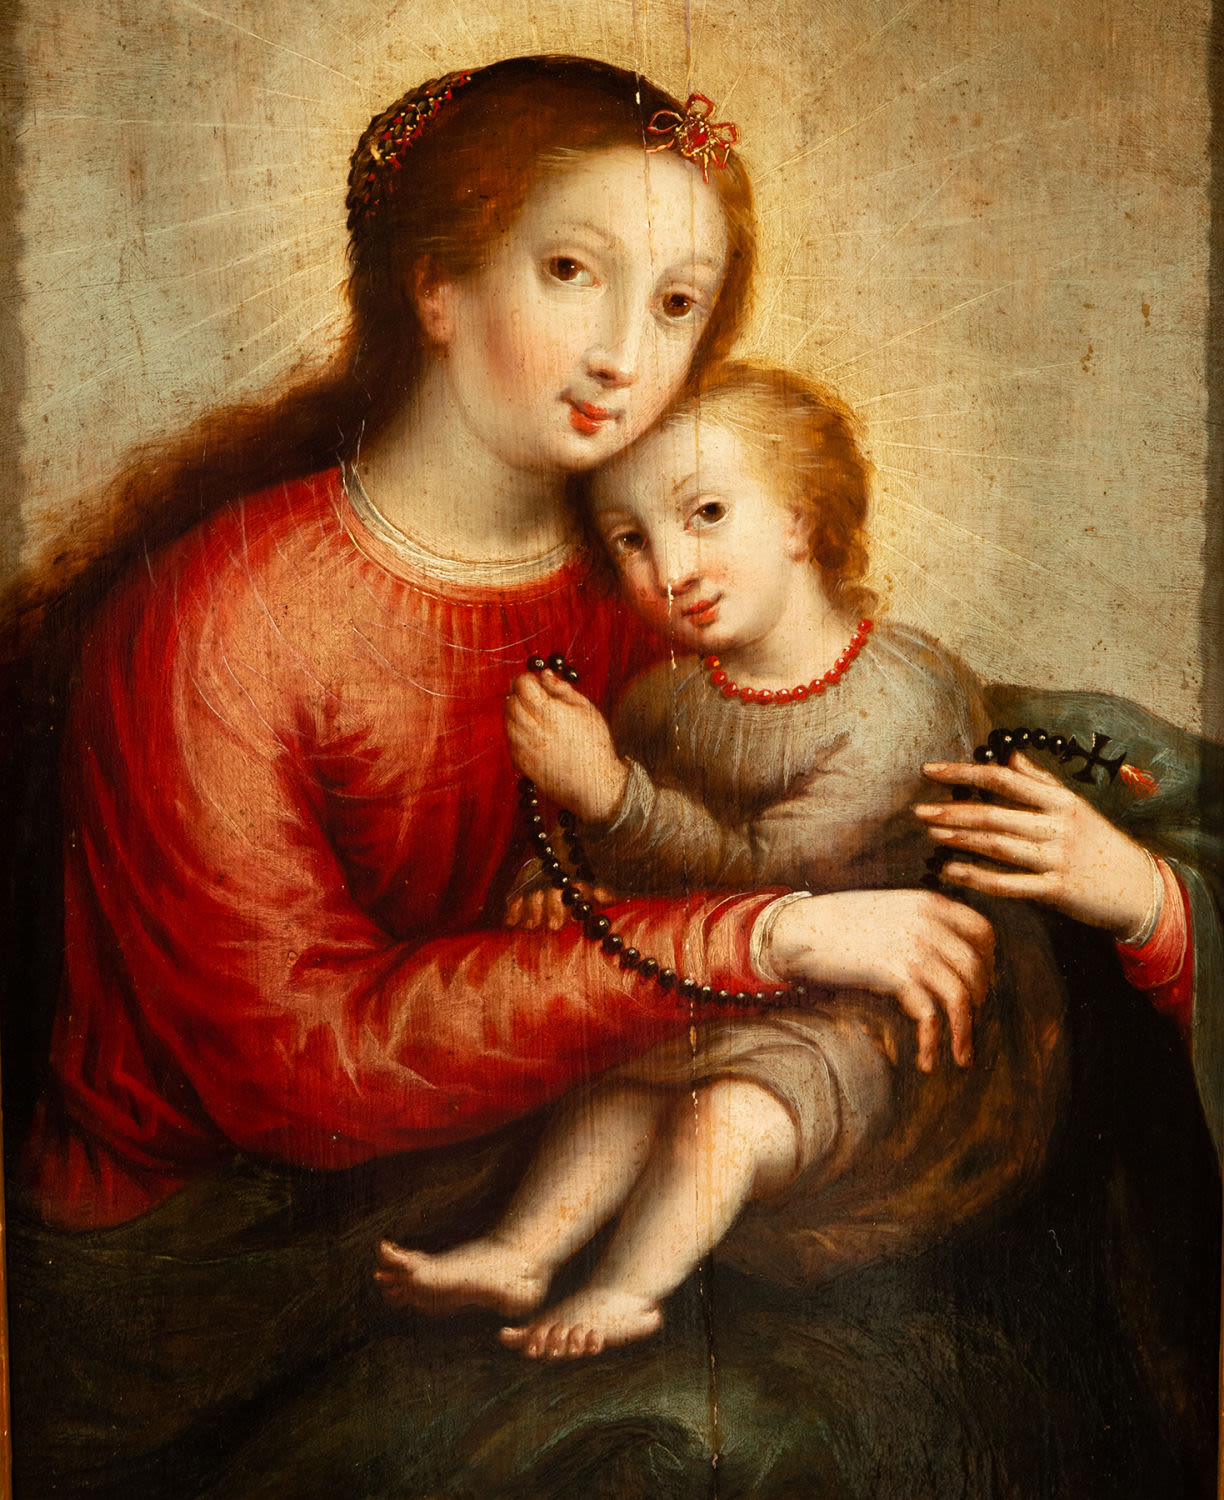 Virgin with Child in Arms, Italian Flemish school of the 16th century - Image 2 of 4